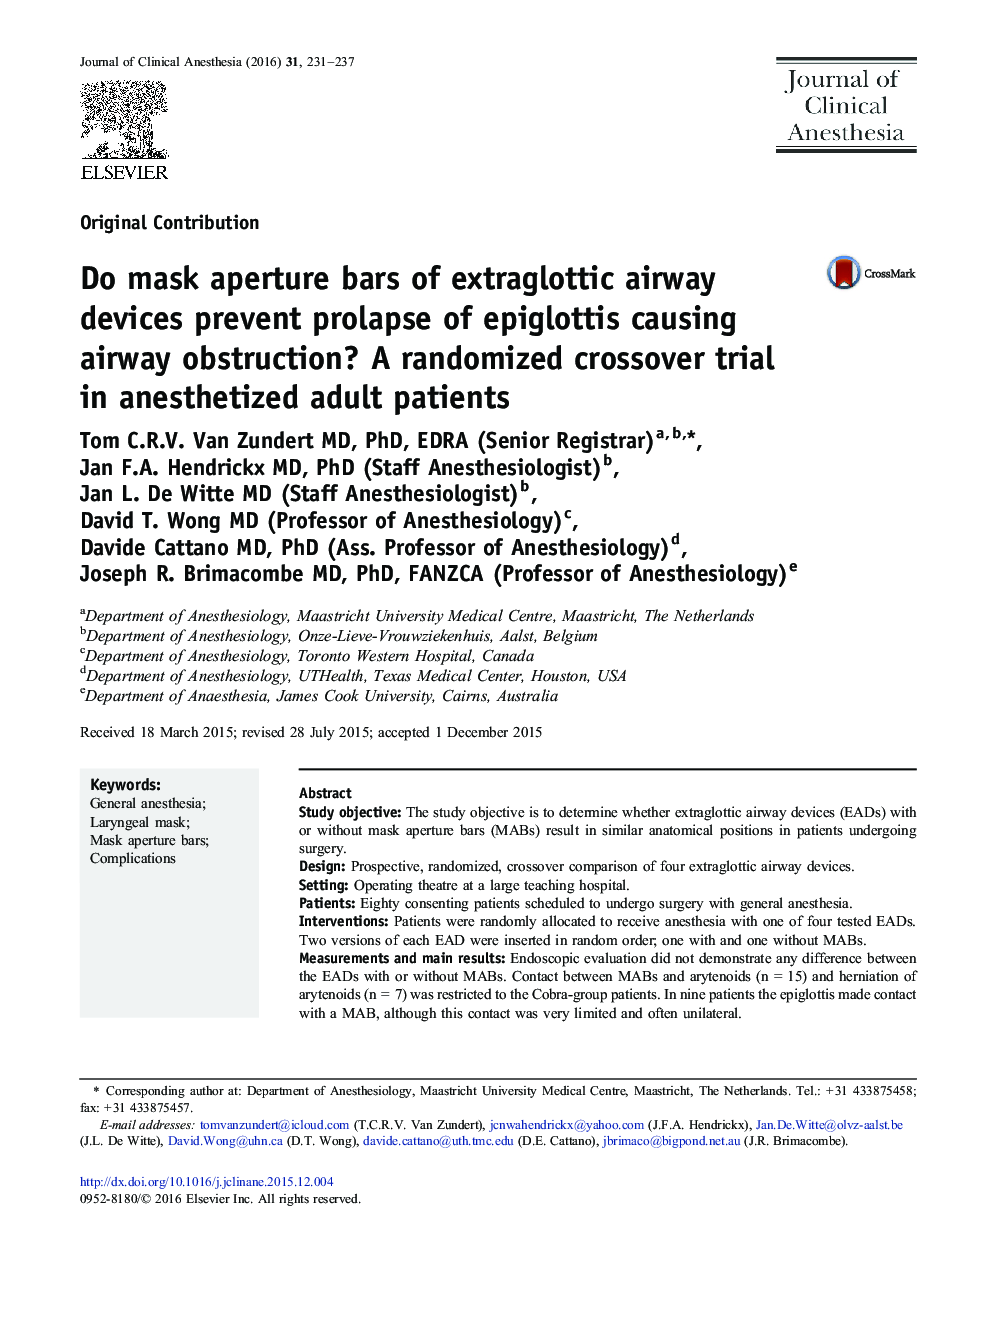 Do mask aperture bars of extraglottic airway devices prevent prolapse of epiglottis causing airway obstruction? A randomized crossover trial in anesthetized adult patients